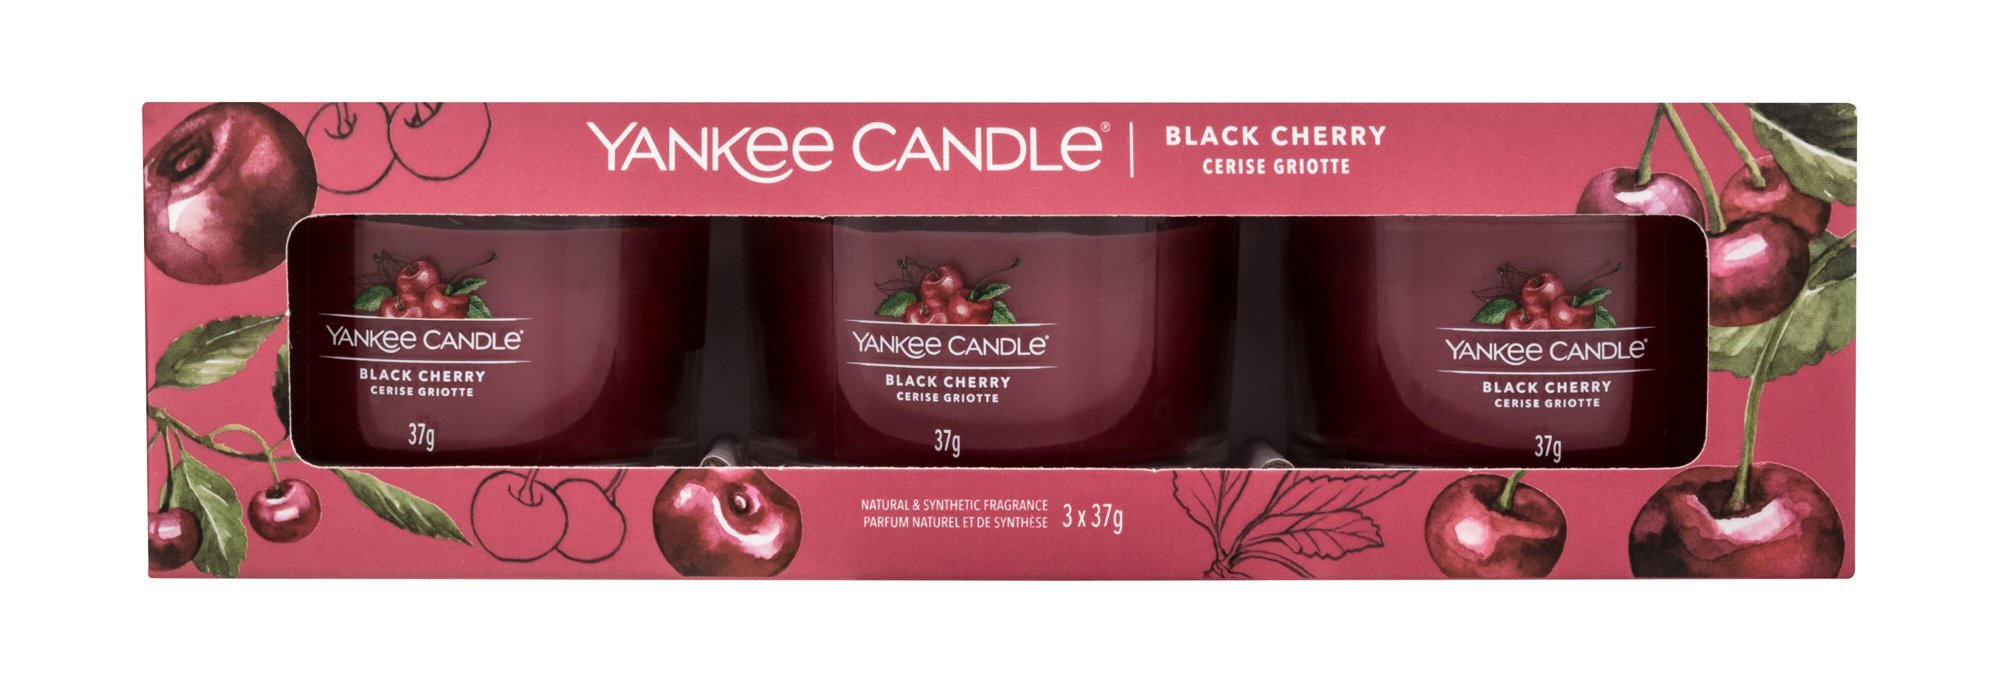 Yankee Candle Black Cherry 37g Scented Candle 3 x 37 g Kvepalai Unisex Scented Candle Rinkinys